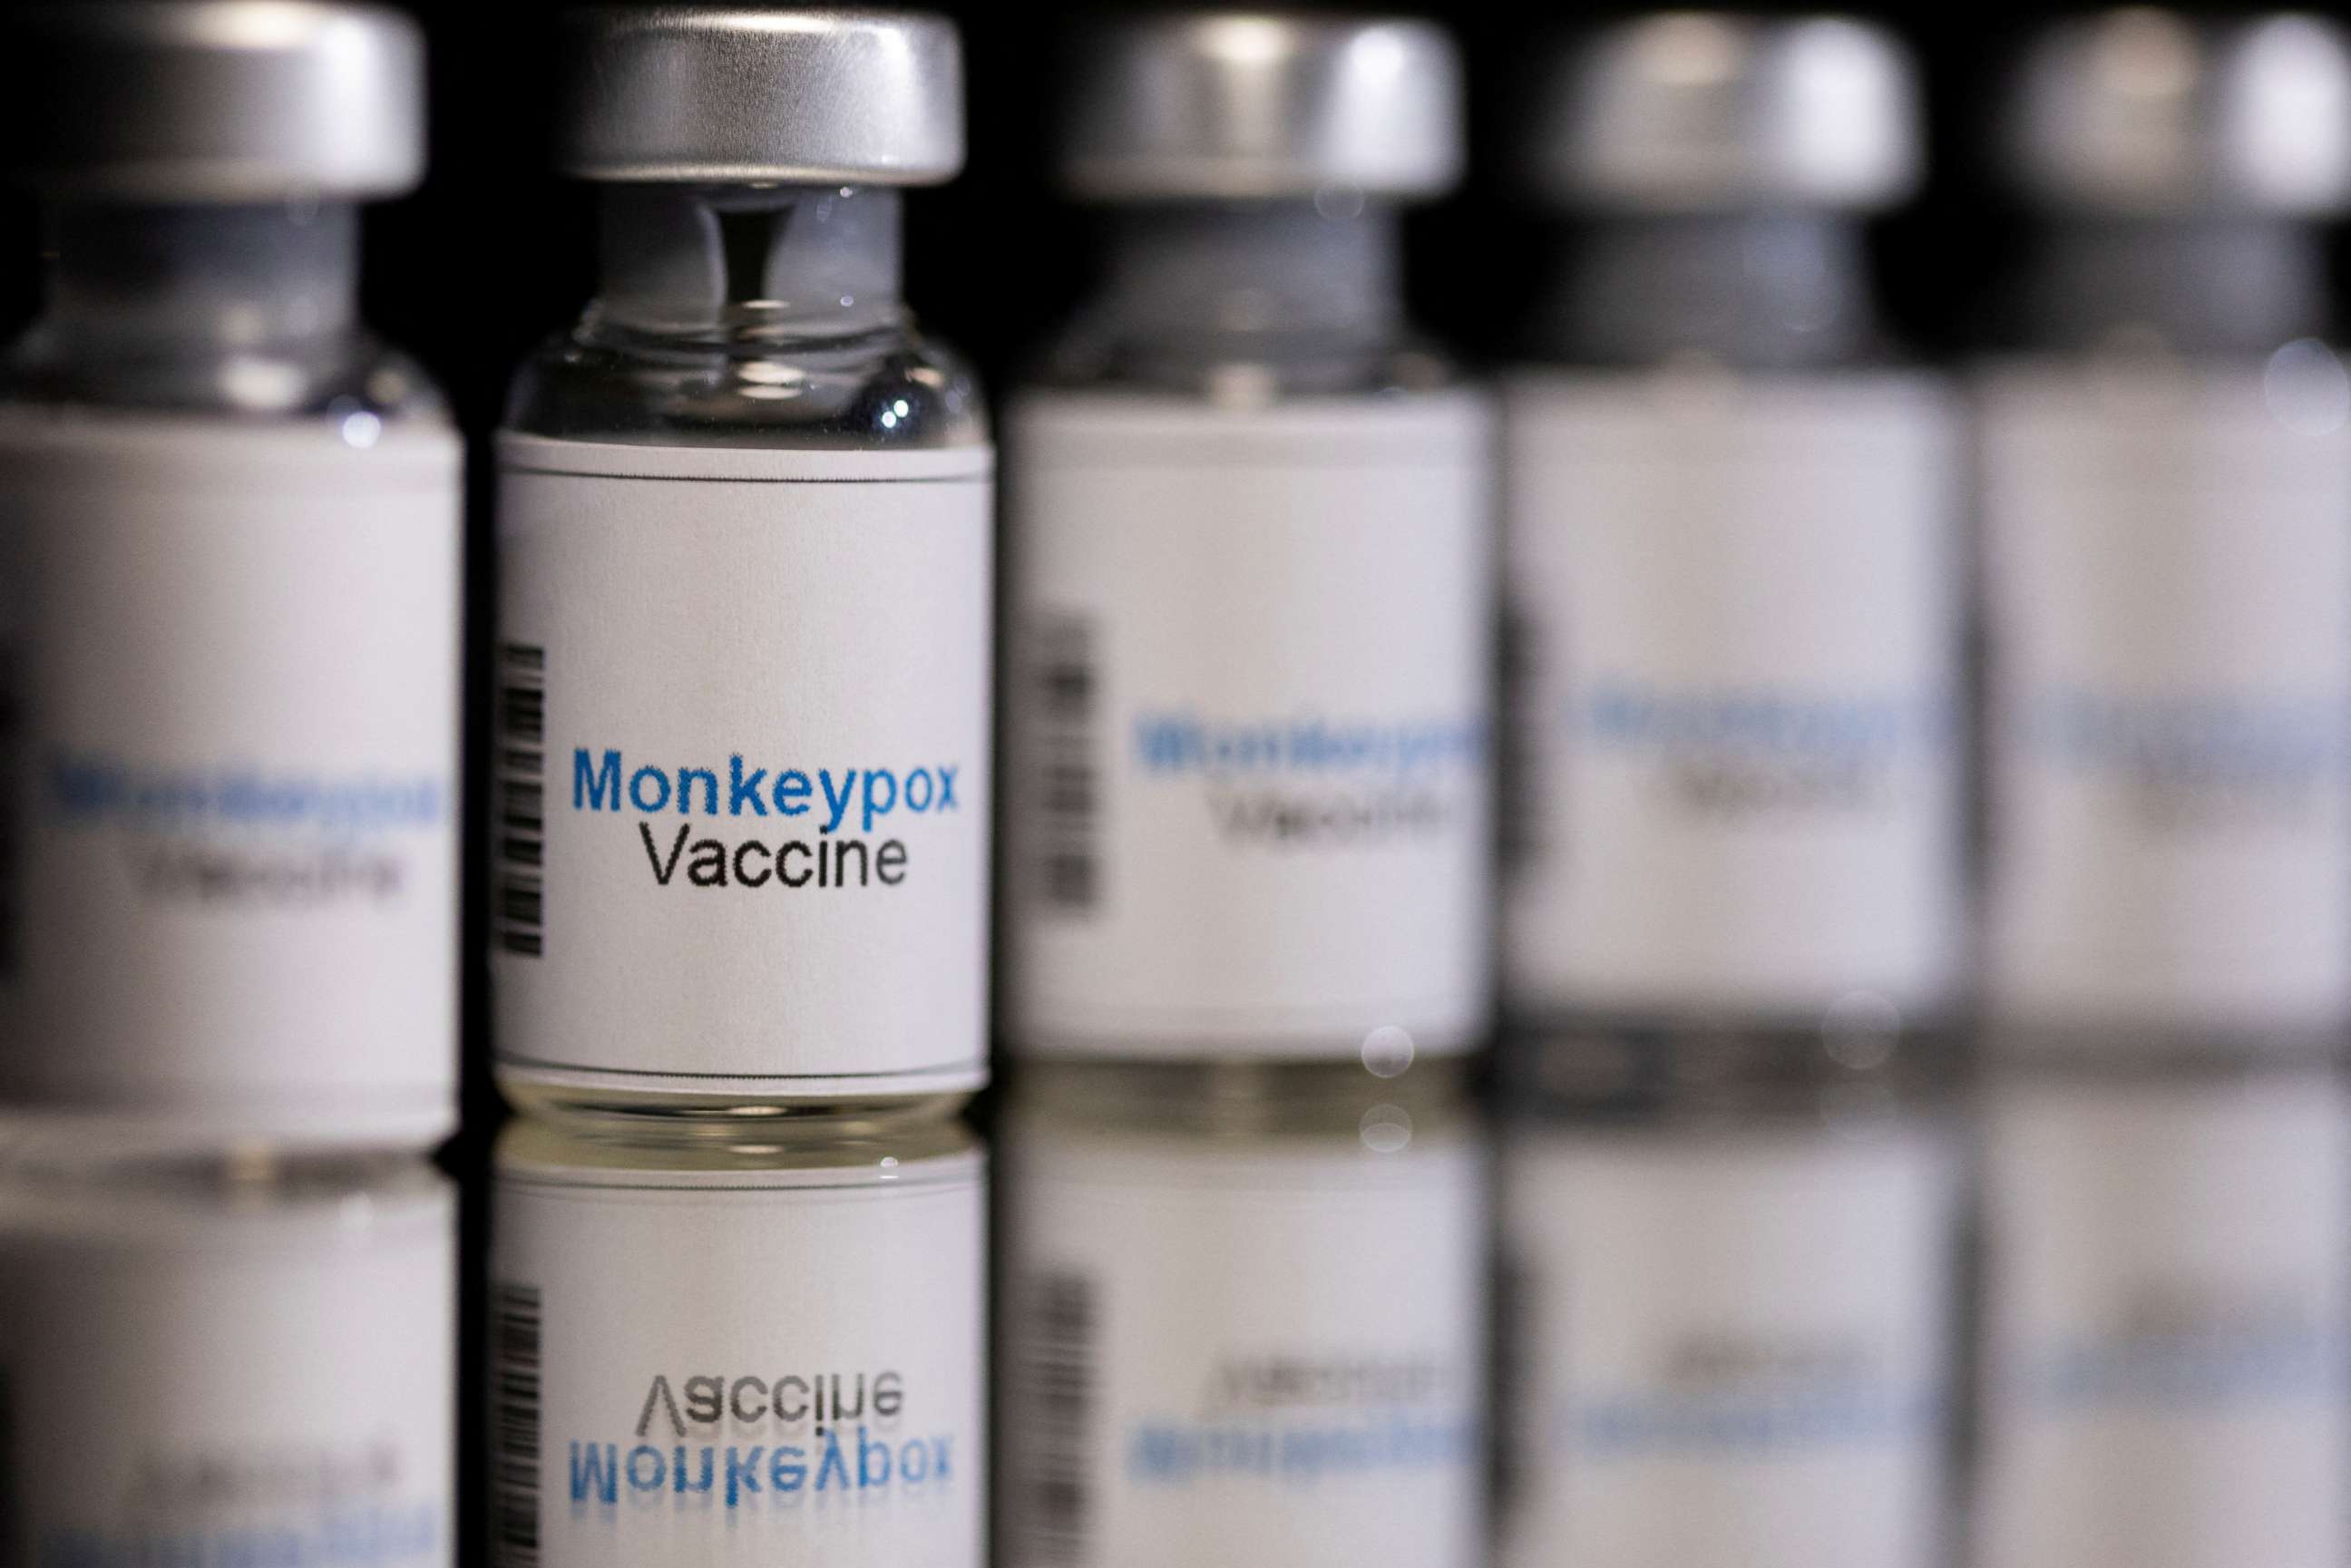 PHOTO: Mock-up vials labeled "Monkeypox vaccine" are seen in this illustration taken, May 25, 2022.